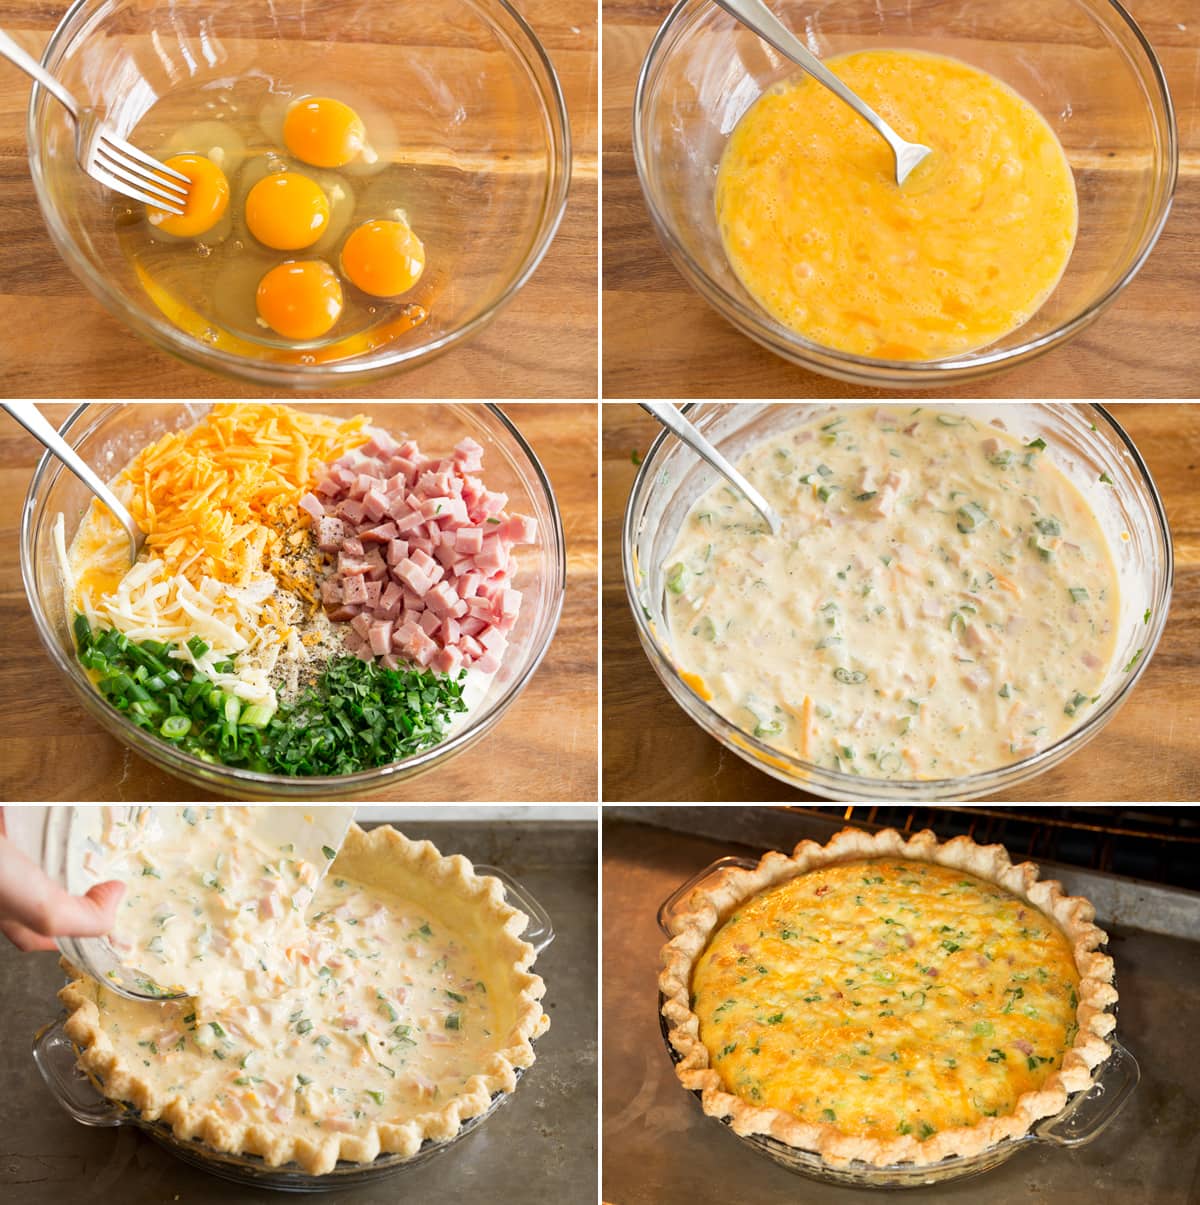 Collage of six photos showing how to make quiche filling and bake in crust.